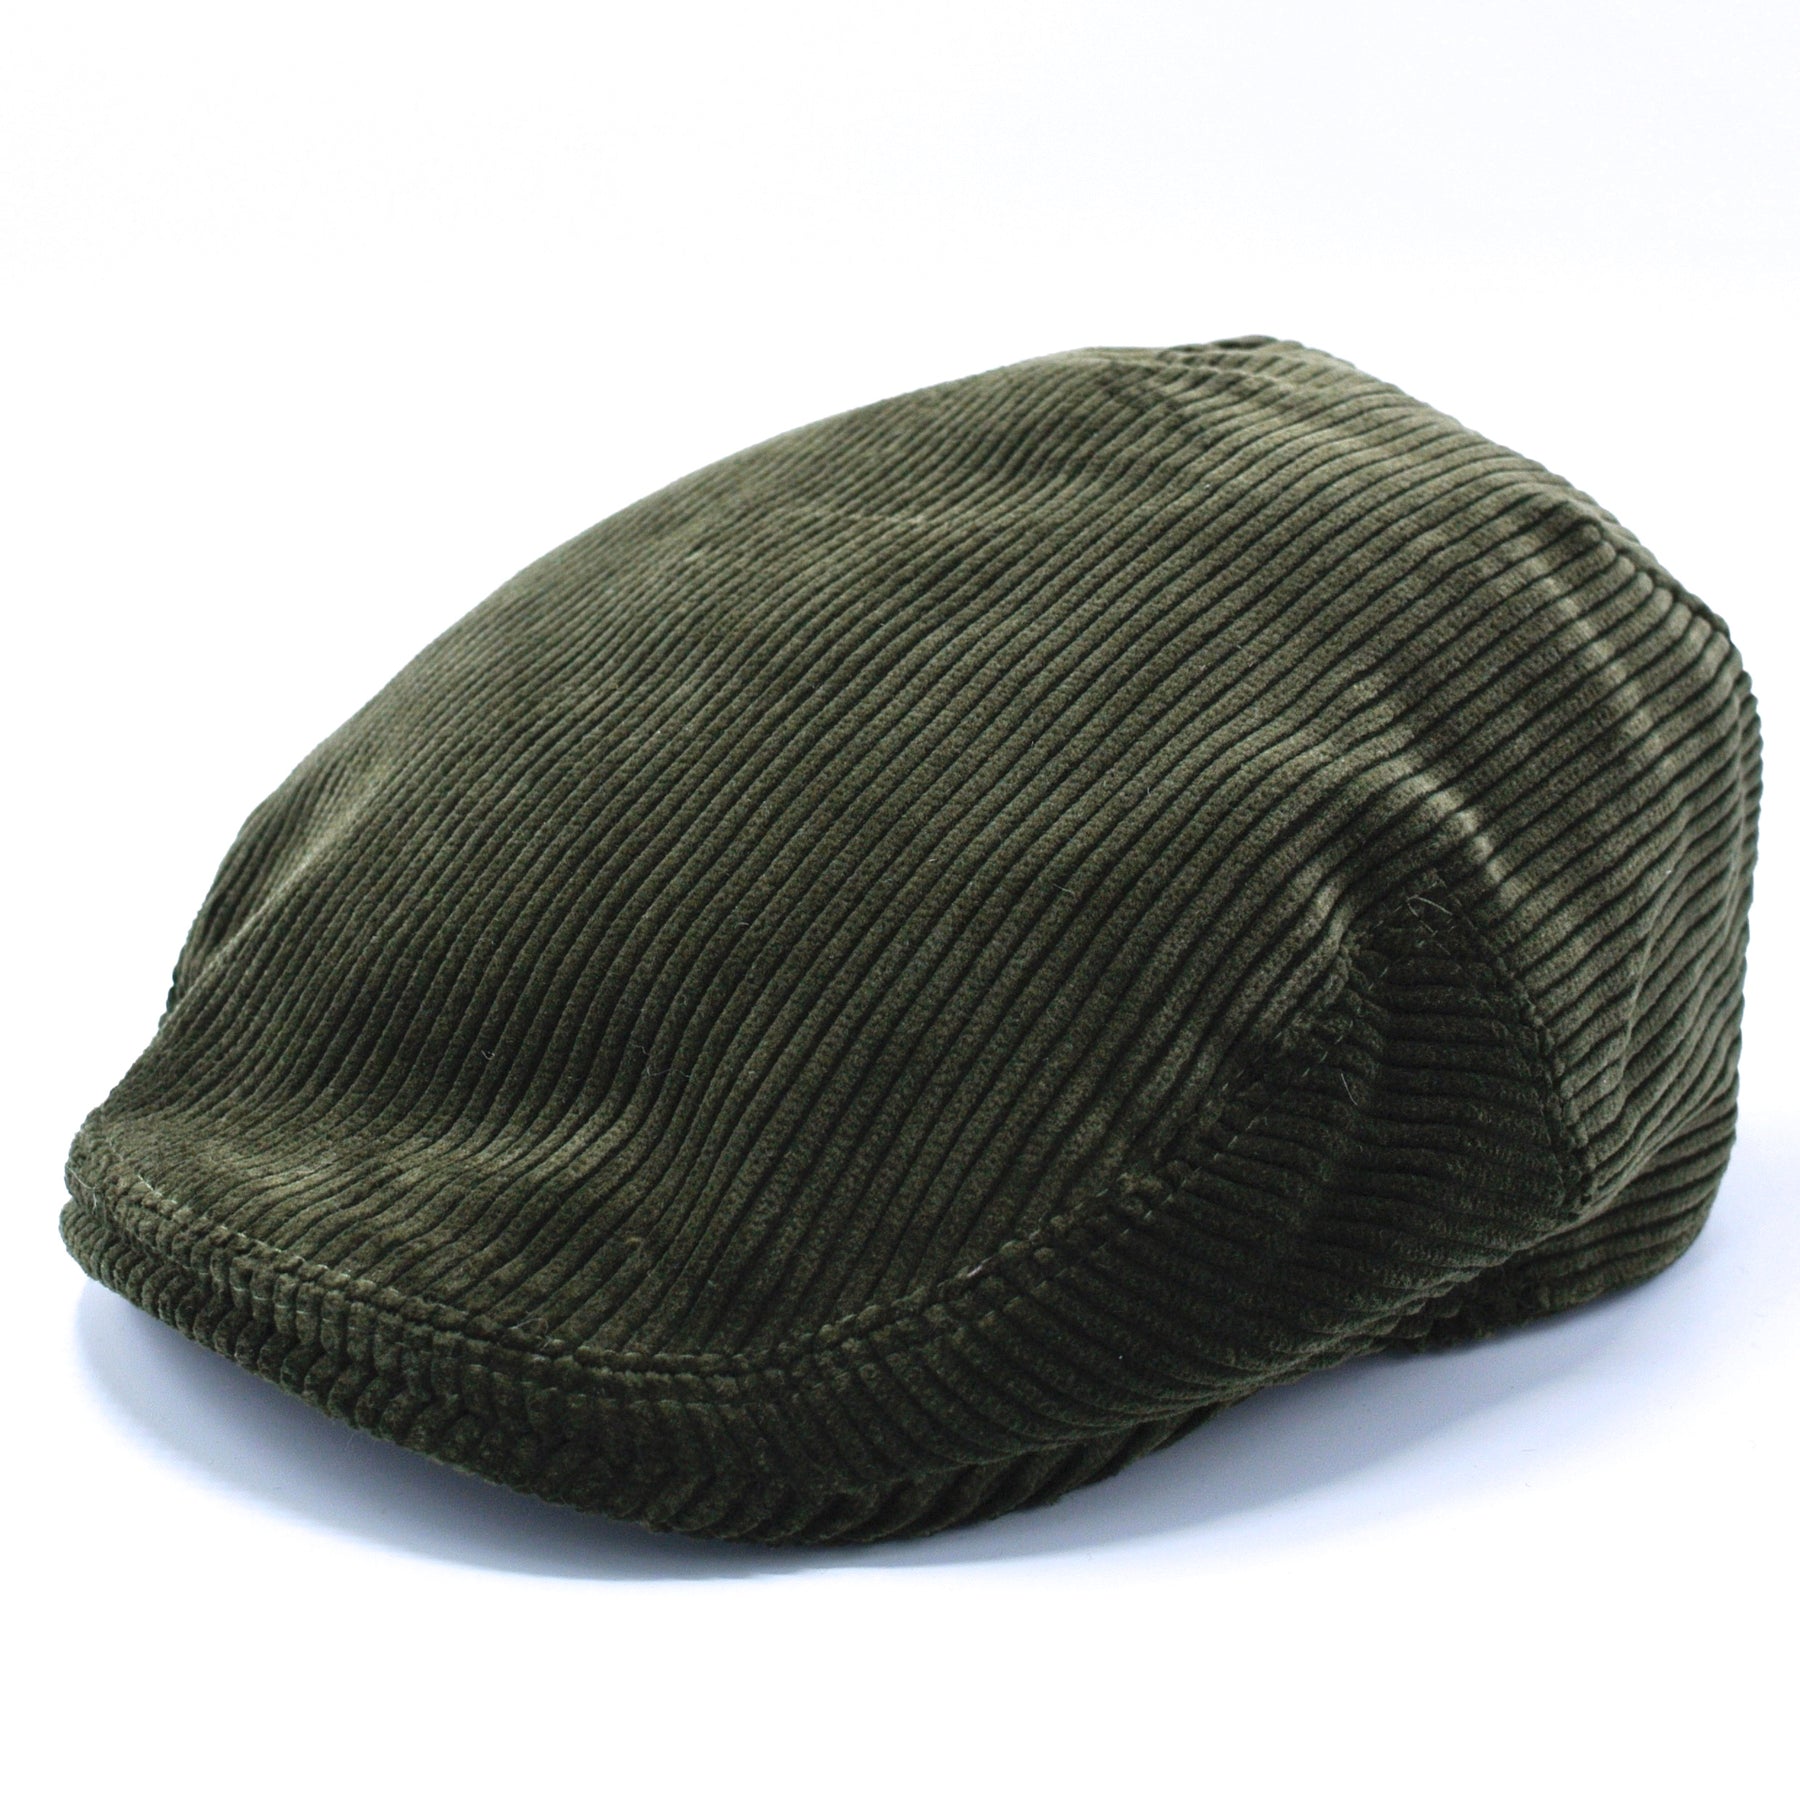 Lawrence and Foster Flat Cap Green Cord